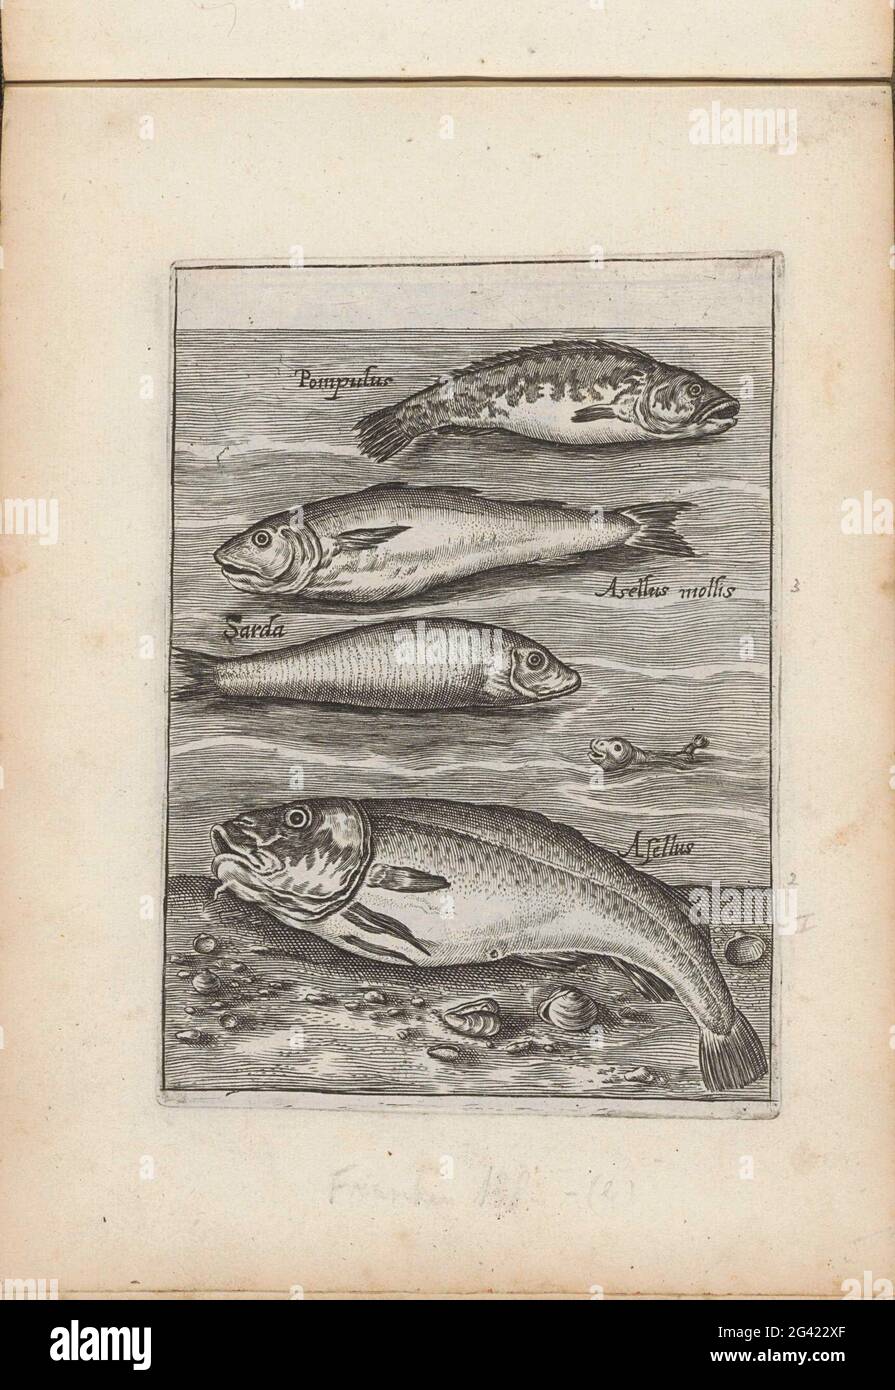 Pilot male, whiting, sarda and cod; Fishing; PISCIUM VIVAE ICONES. Four fish. From top to bottom a pilot male, whiting, sarda and cod. With every fish the name in Latin. This print is part of an album. Stock Photo